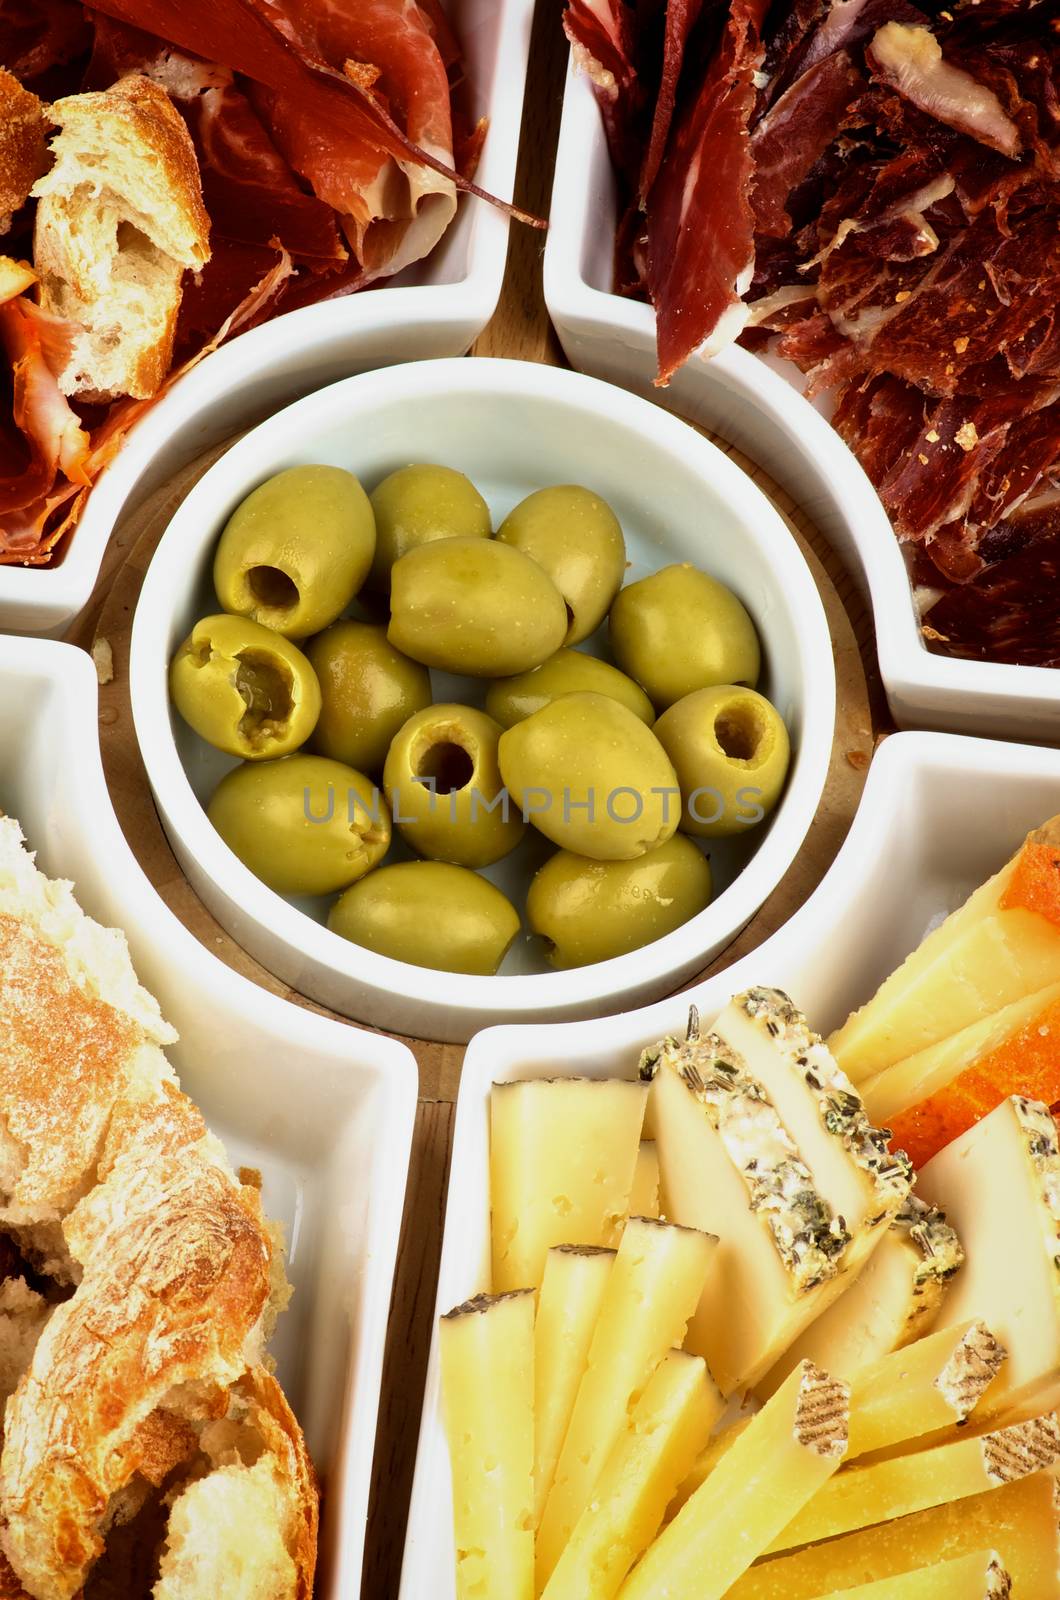 Various Spanish Snacks with Cheeses, Jamon, Cured Ham and Green Olives on Serving Plate Cross Section